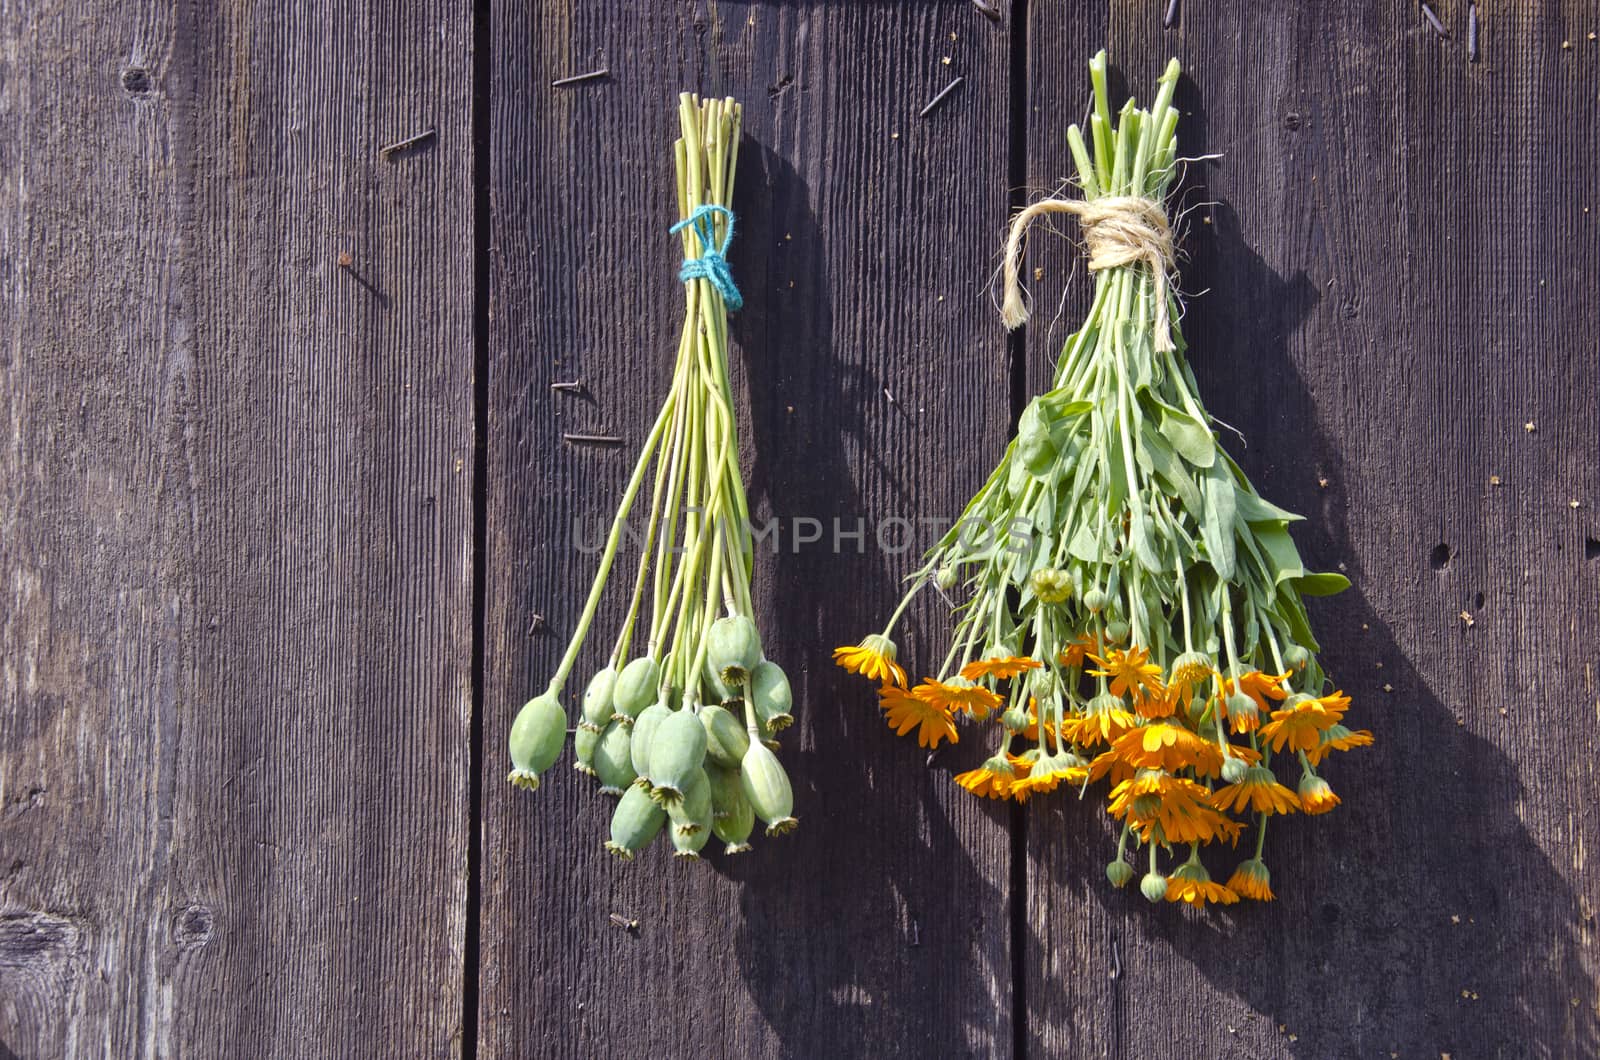 Bundles of fresh herbs hanged to dry  on a wooden wall   by alis_photo